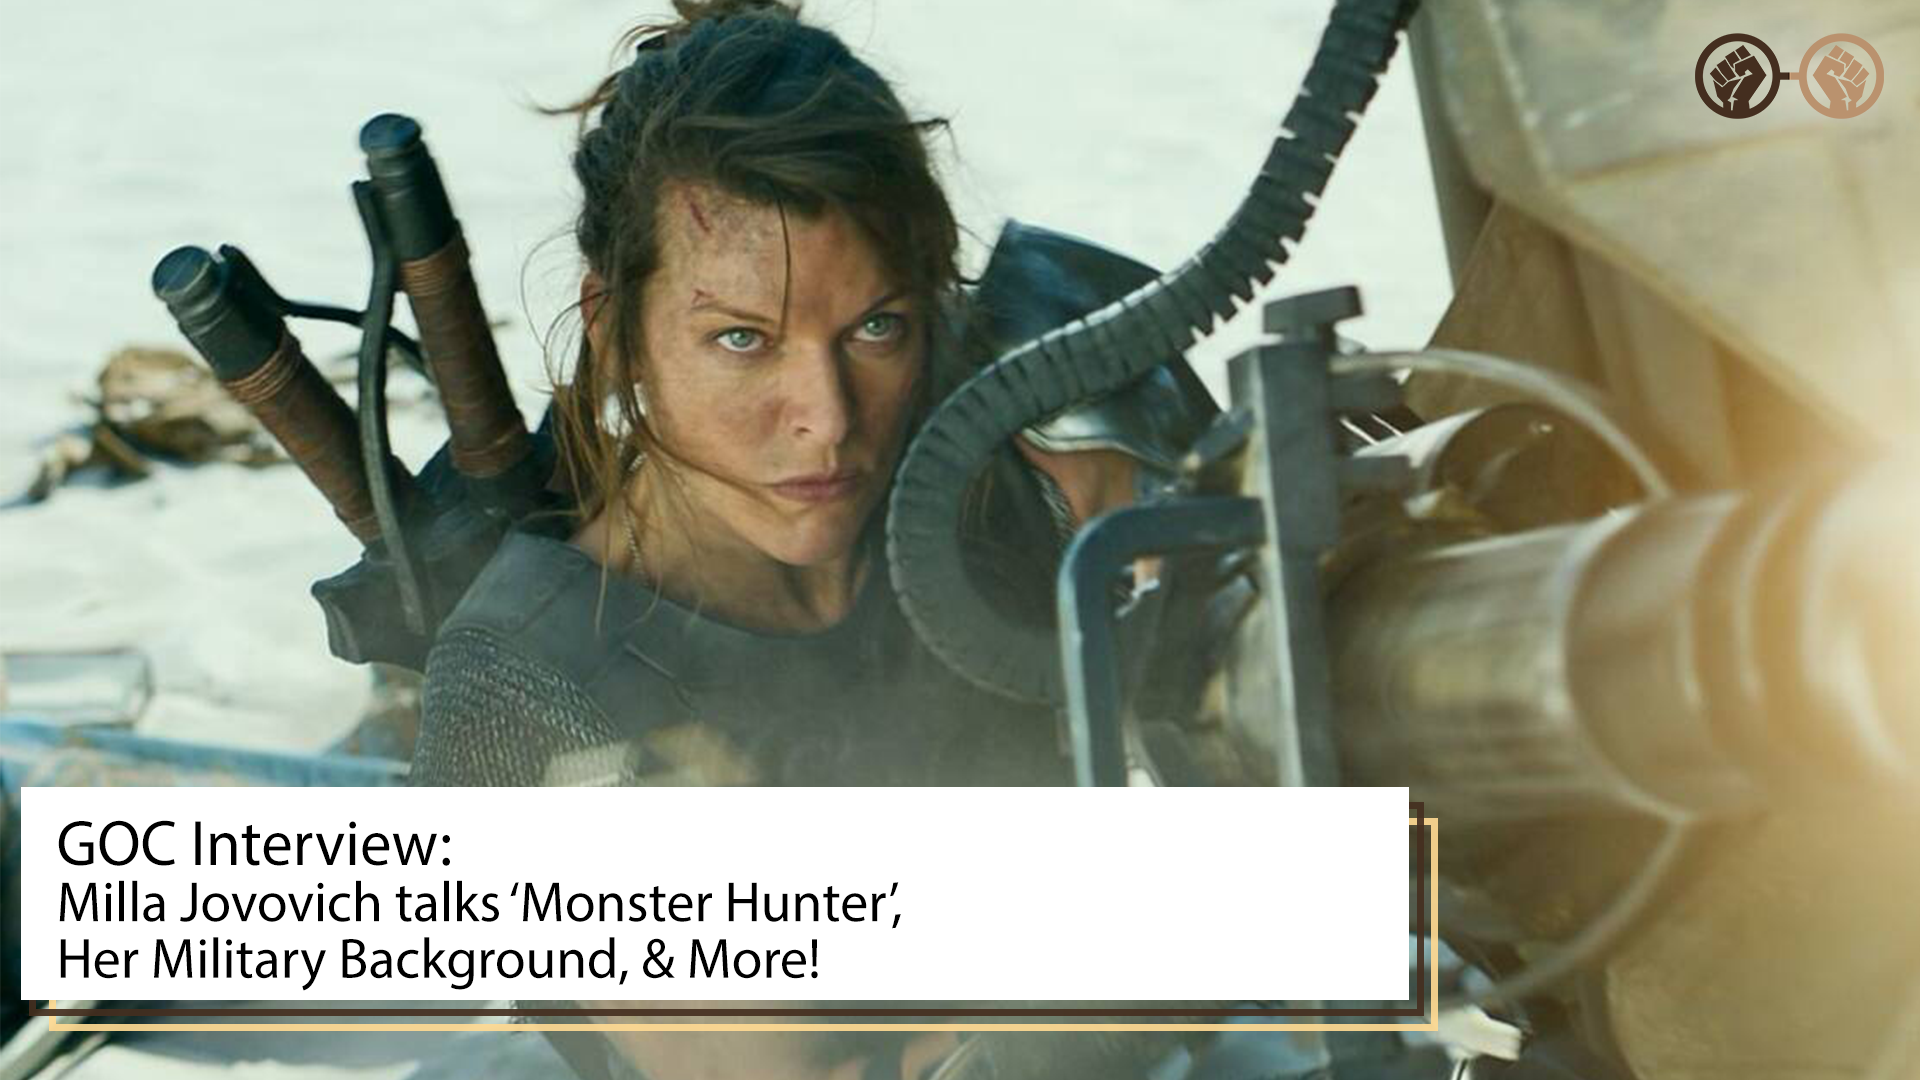 Interview: Milla Jovovich Talks ‘Monster Hunter’, Her Military Background, & More